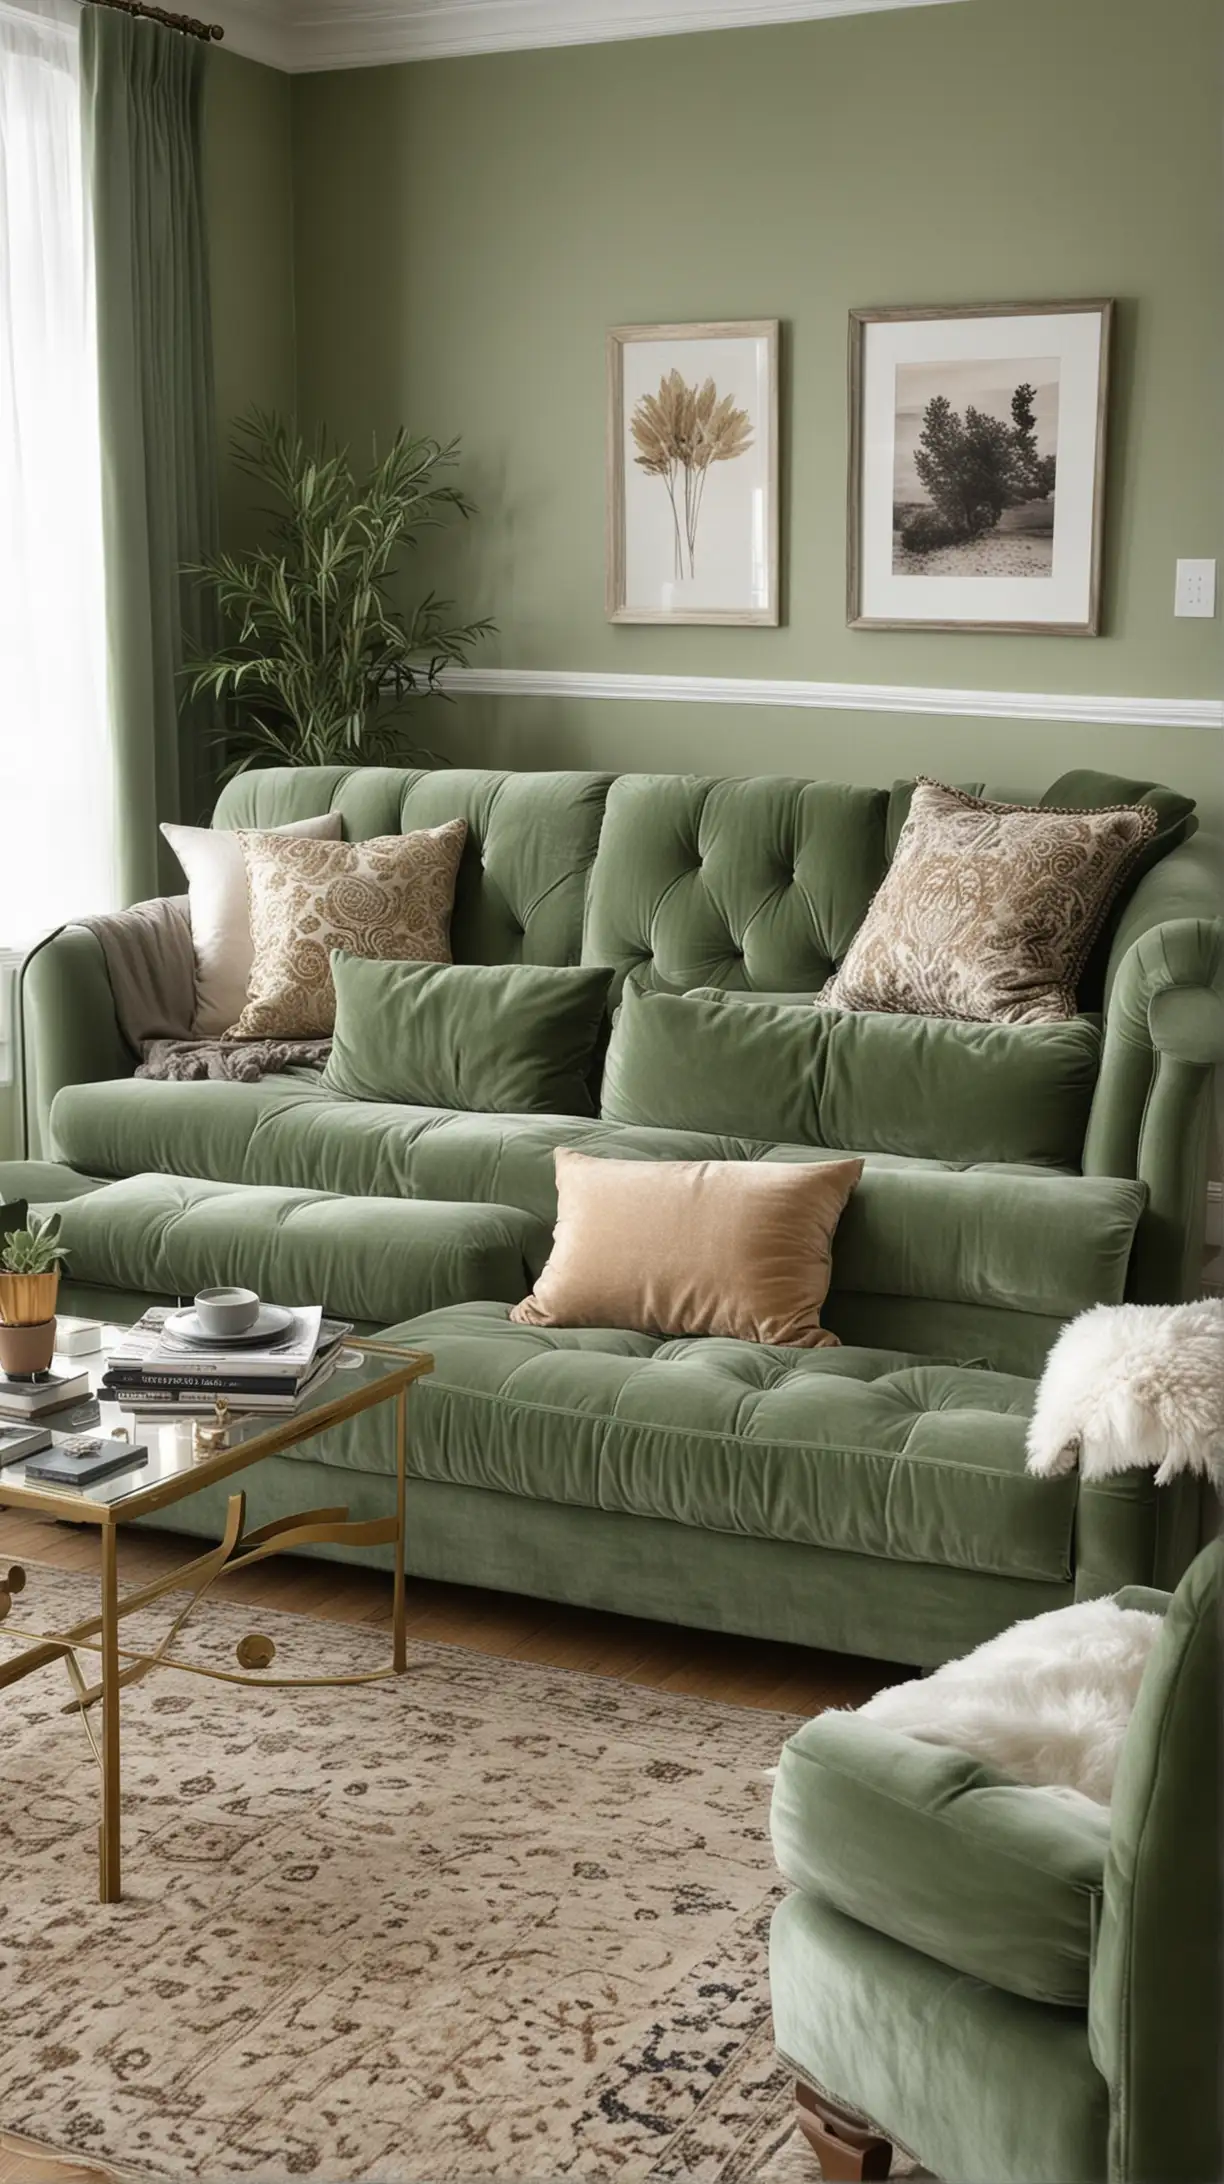 Luxurious Velvet Sage Green Sofa in a Stylish Living Room Setting